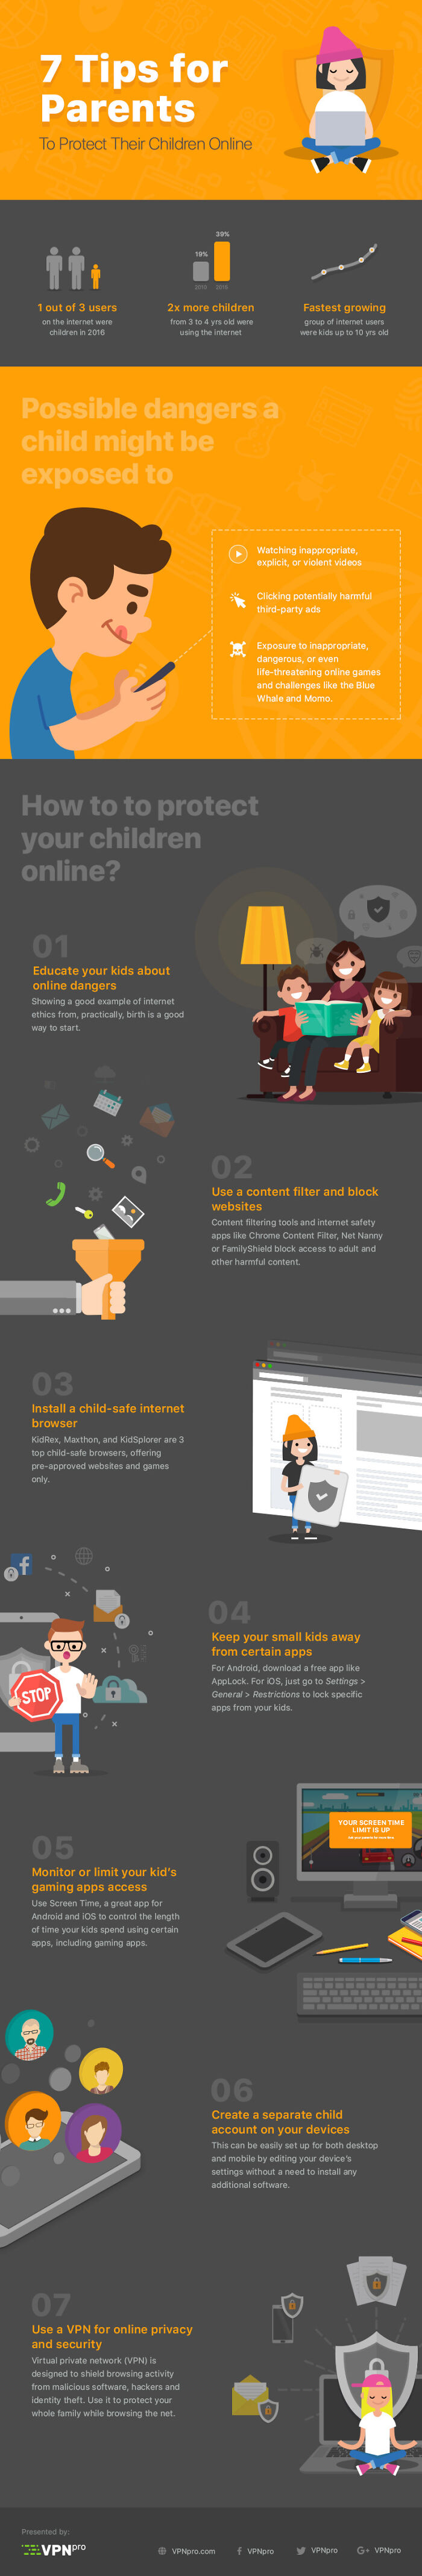 7 Tips For Parents To Protect Their Children Online